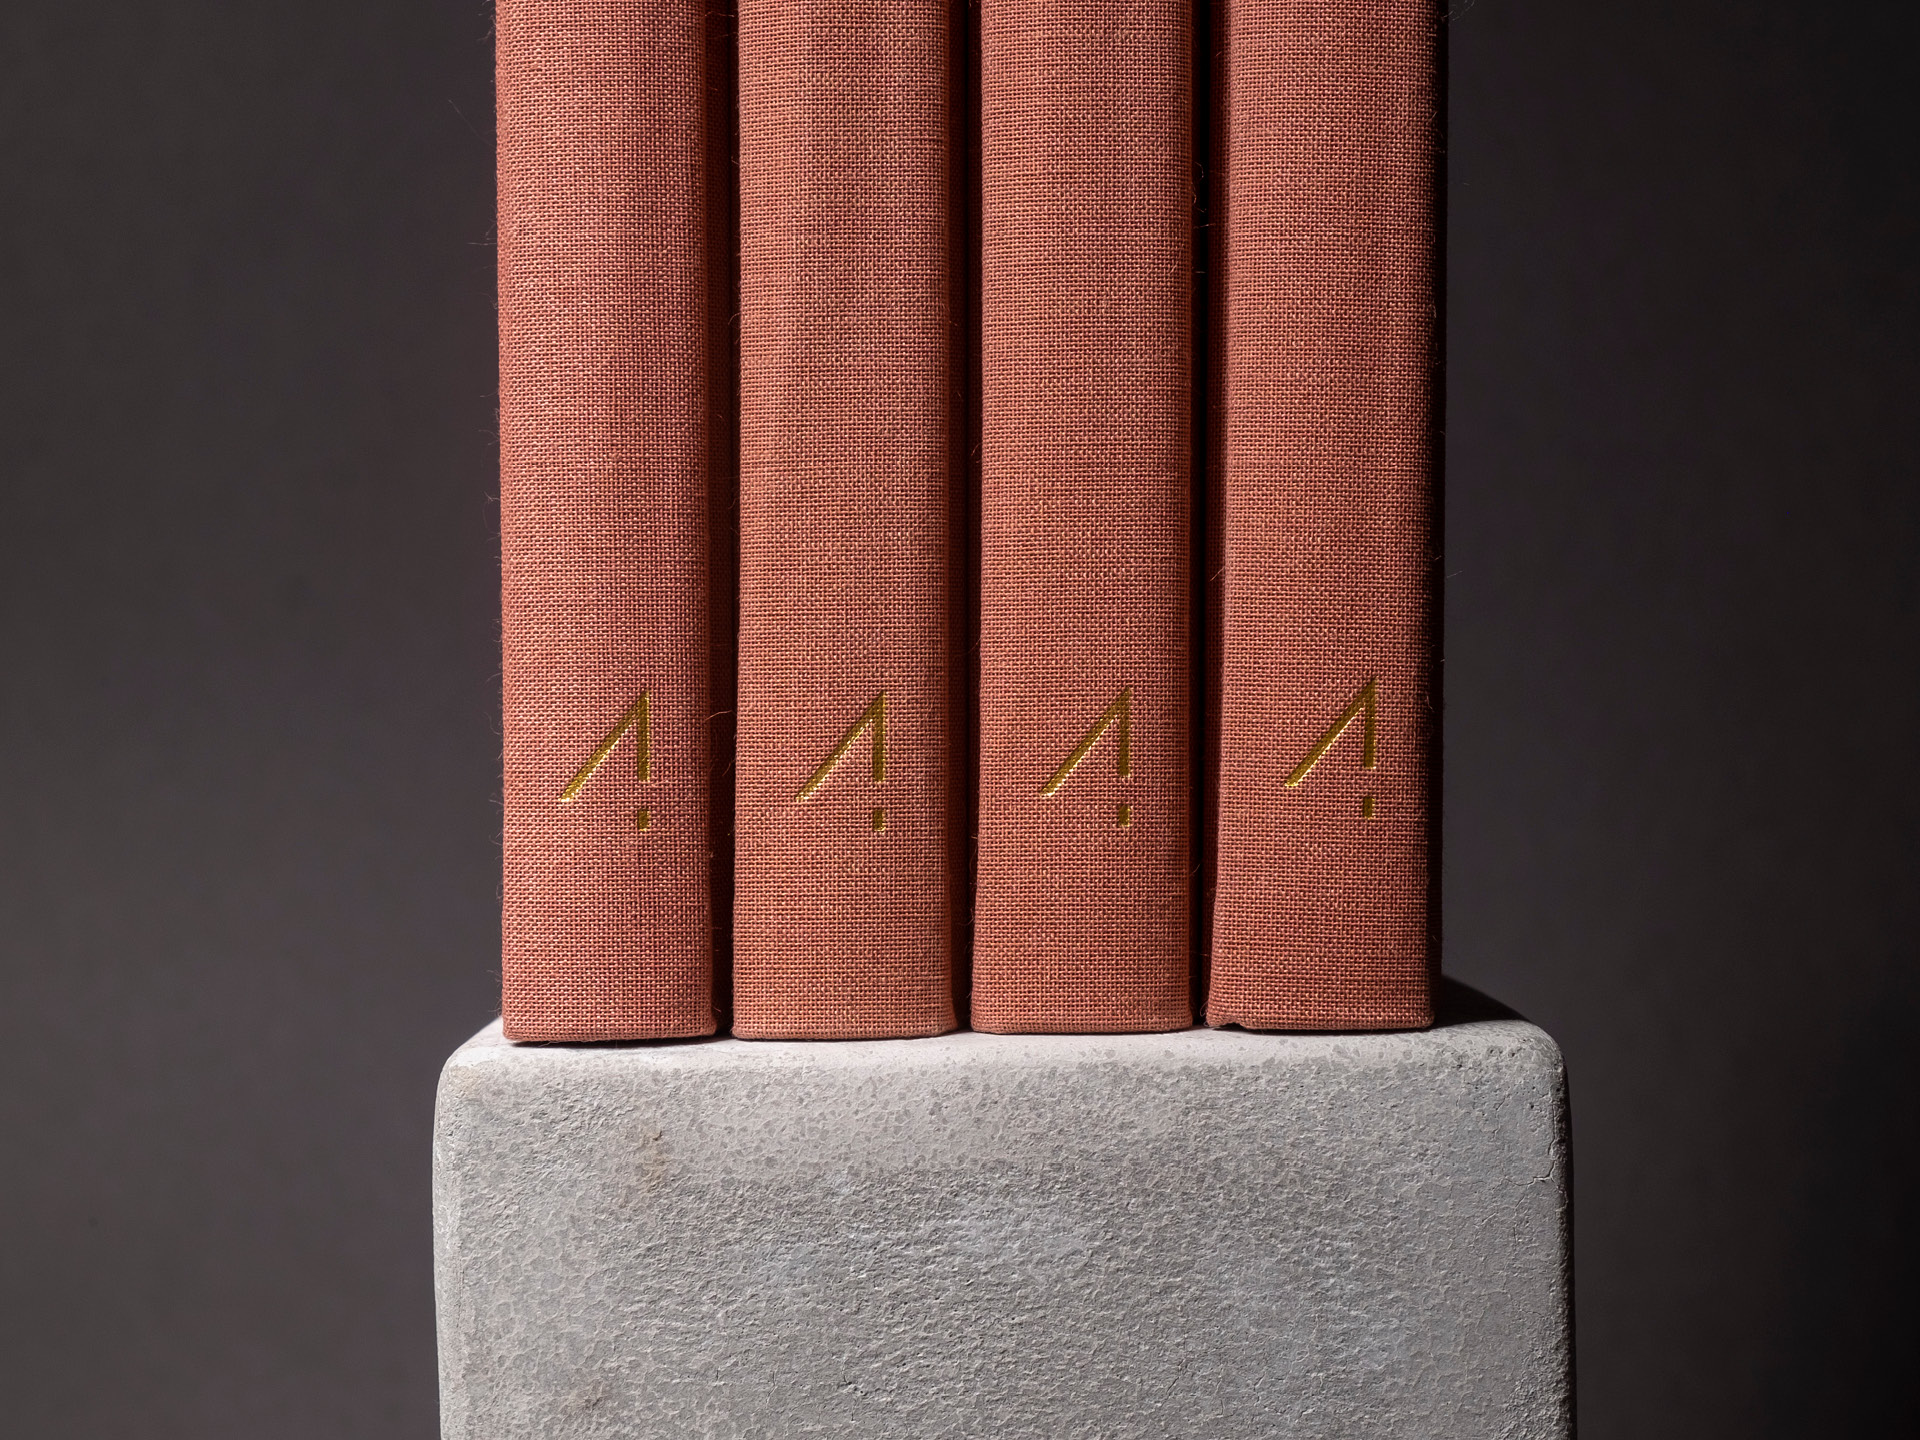 Four copper foiled logos on canvas spine